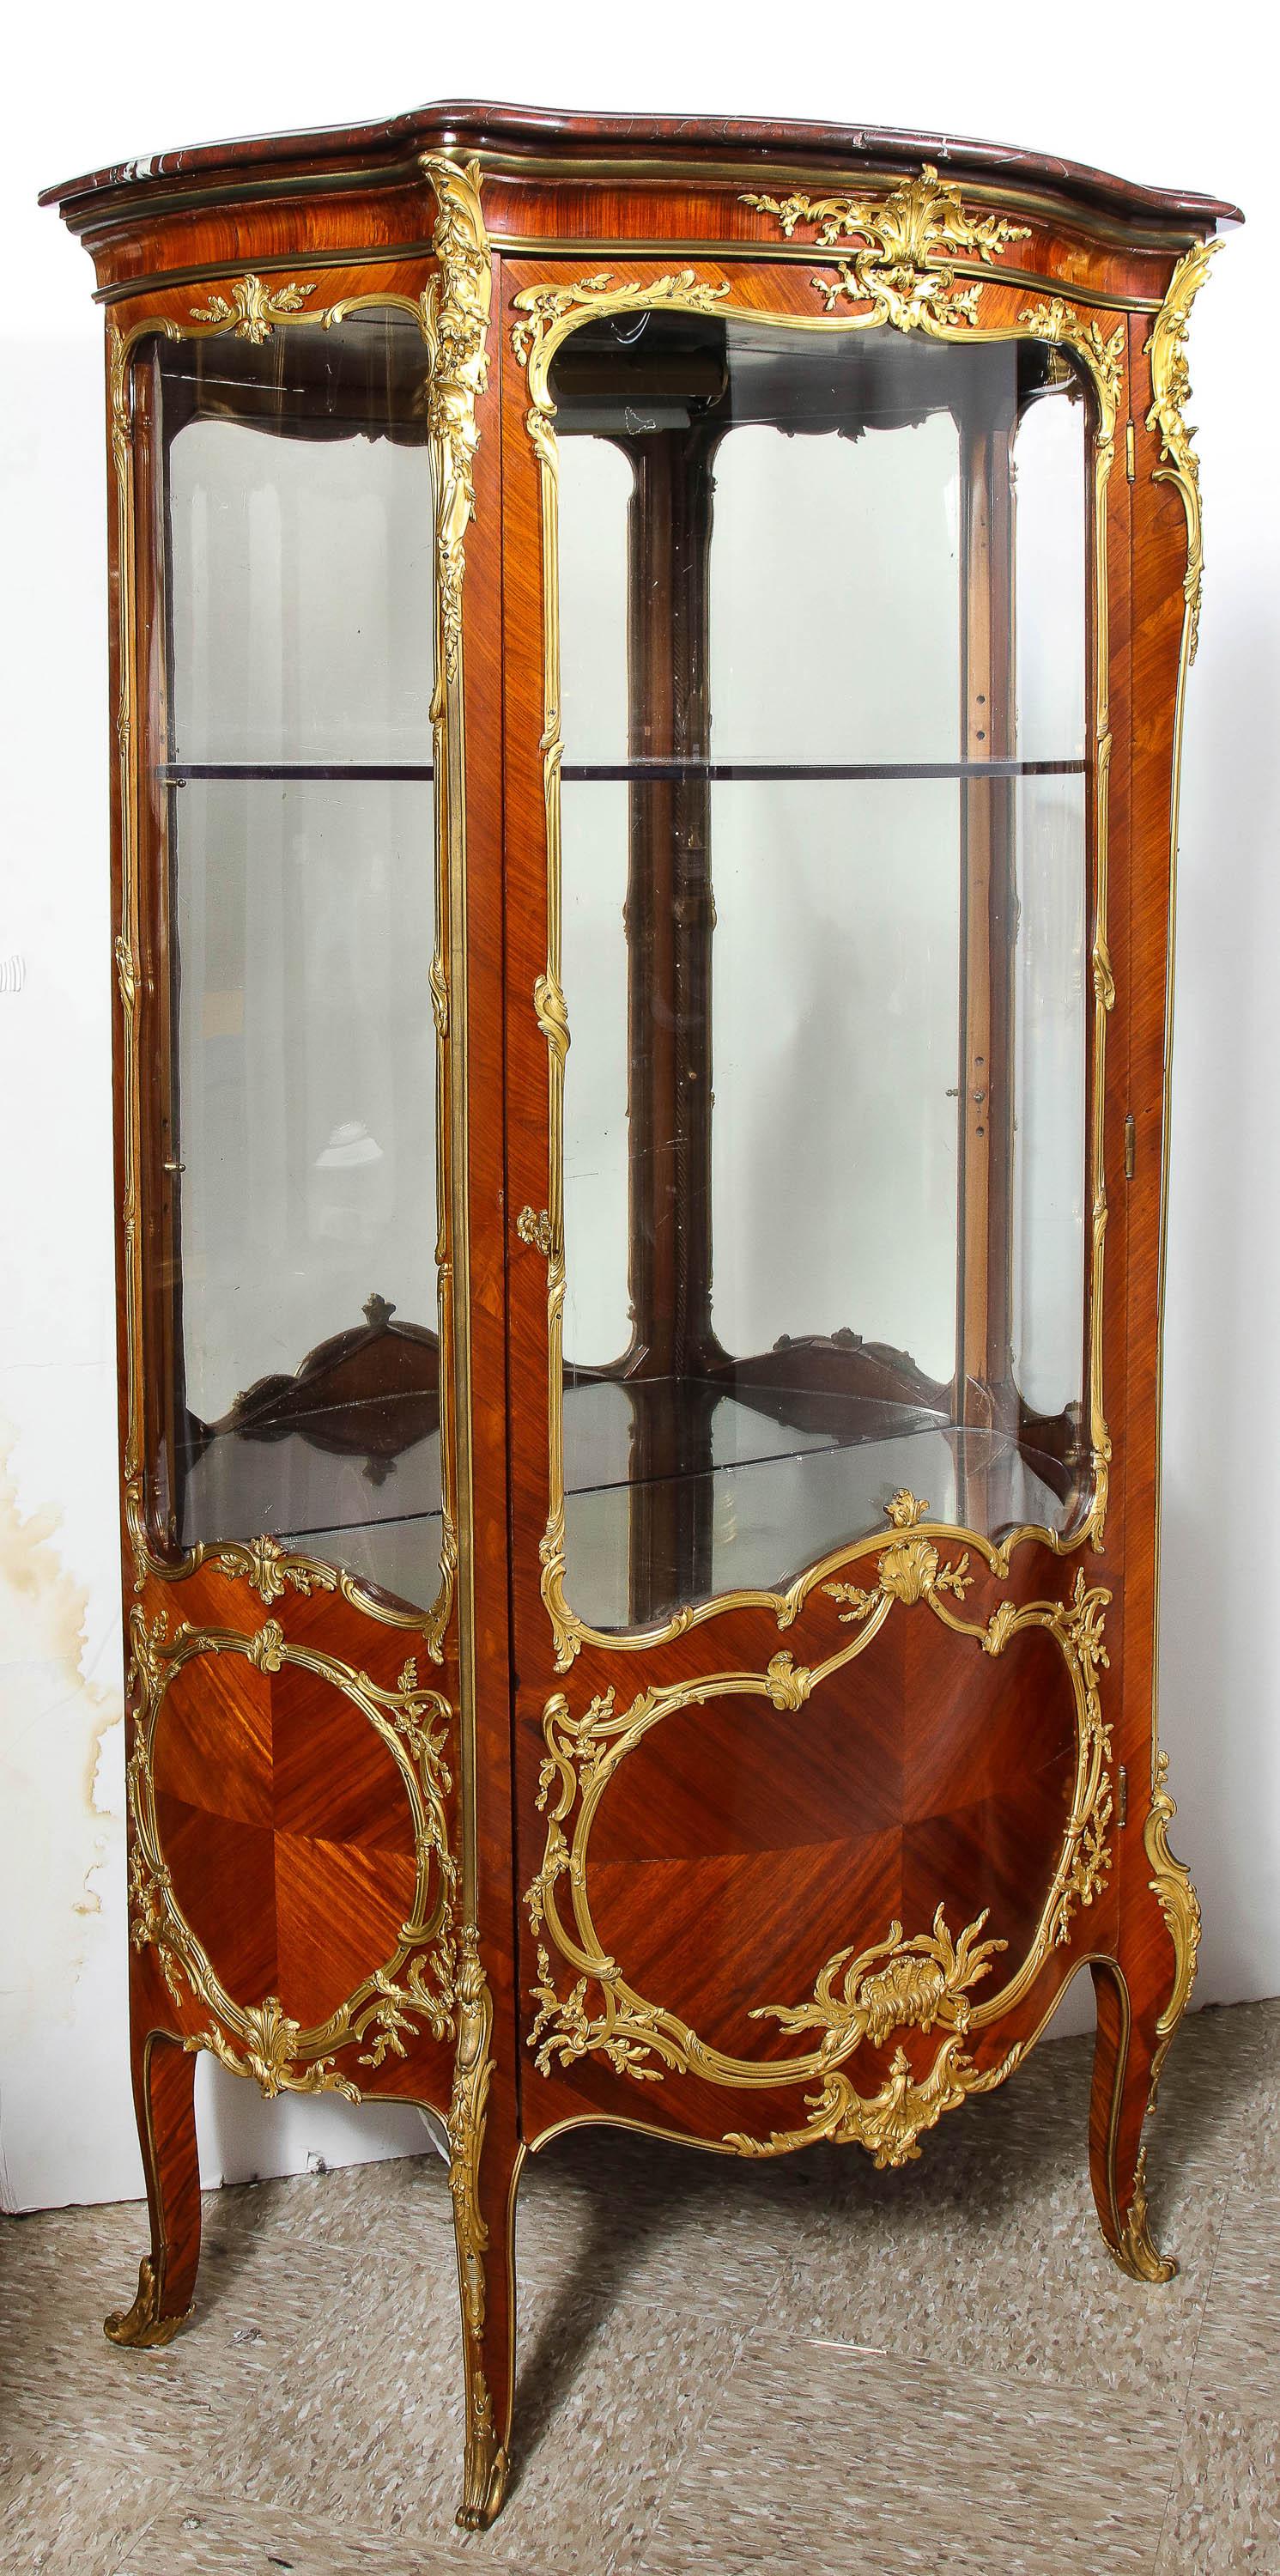 Francois Linke, an exceptional French ormolu-mounted Kingwood vitrine cabinet, circa 1880.

Signed Linke to the left bronze chute mount. 100% authentic.

Very fine quality bronze scroll mounts and with the famous Linke crab mounts to the door,